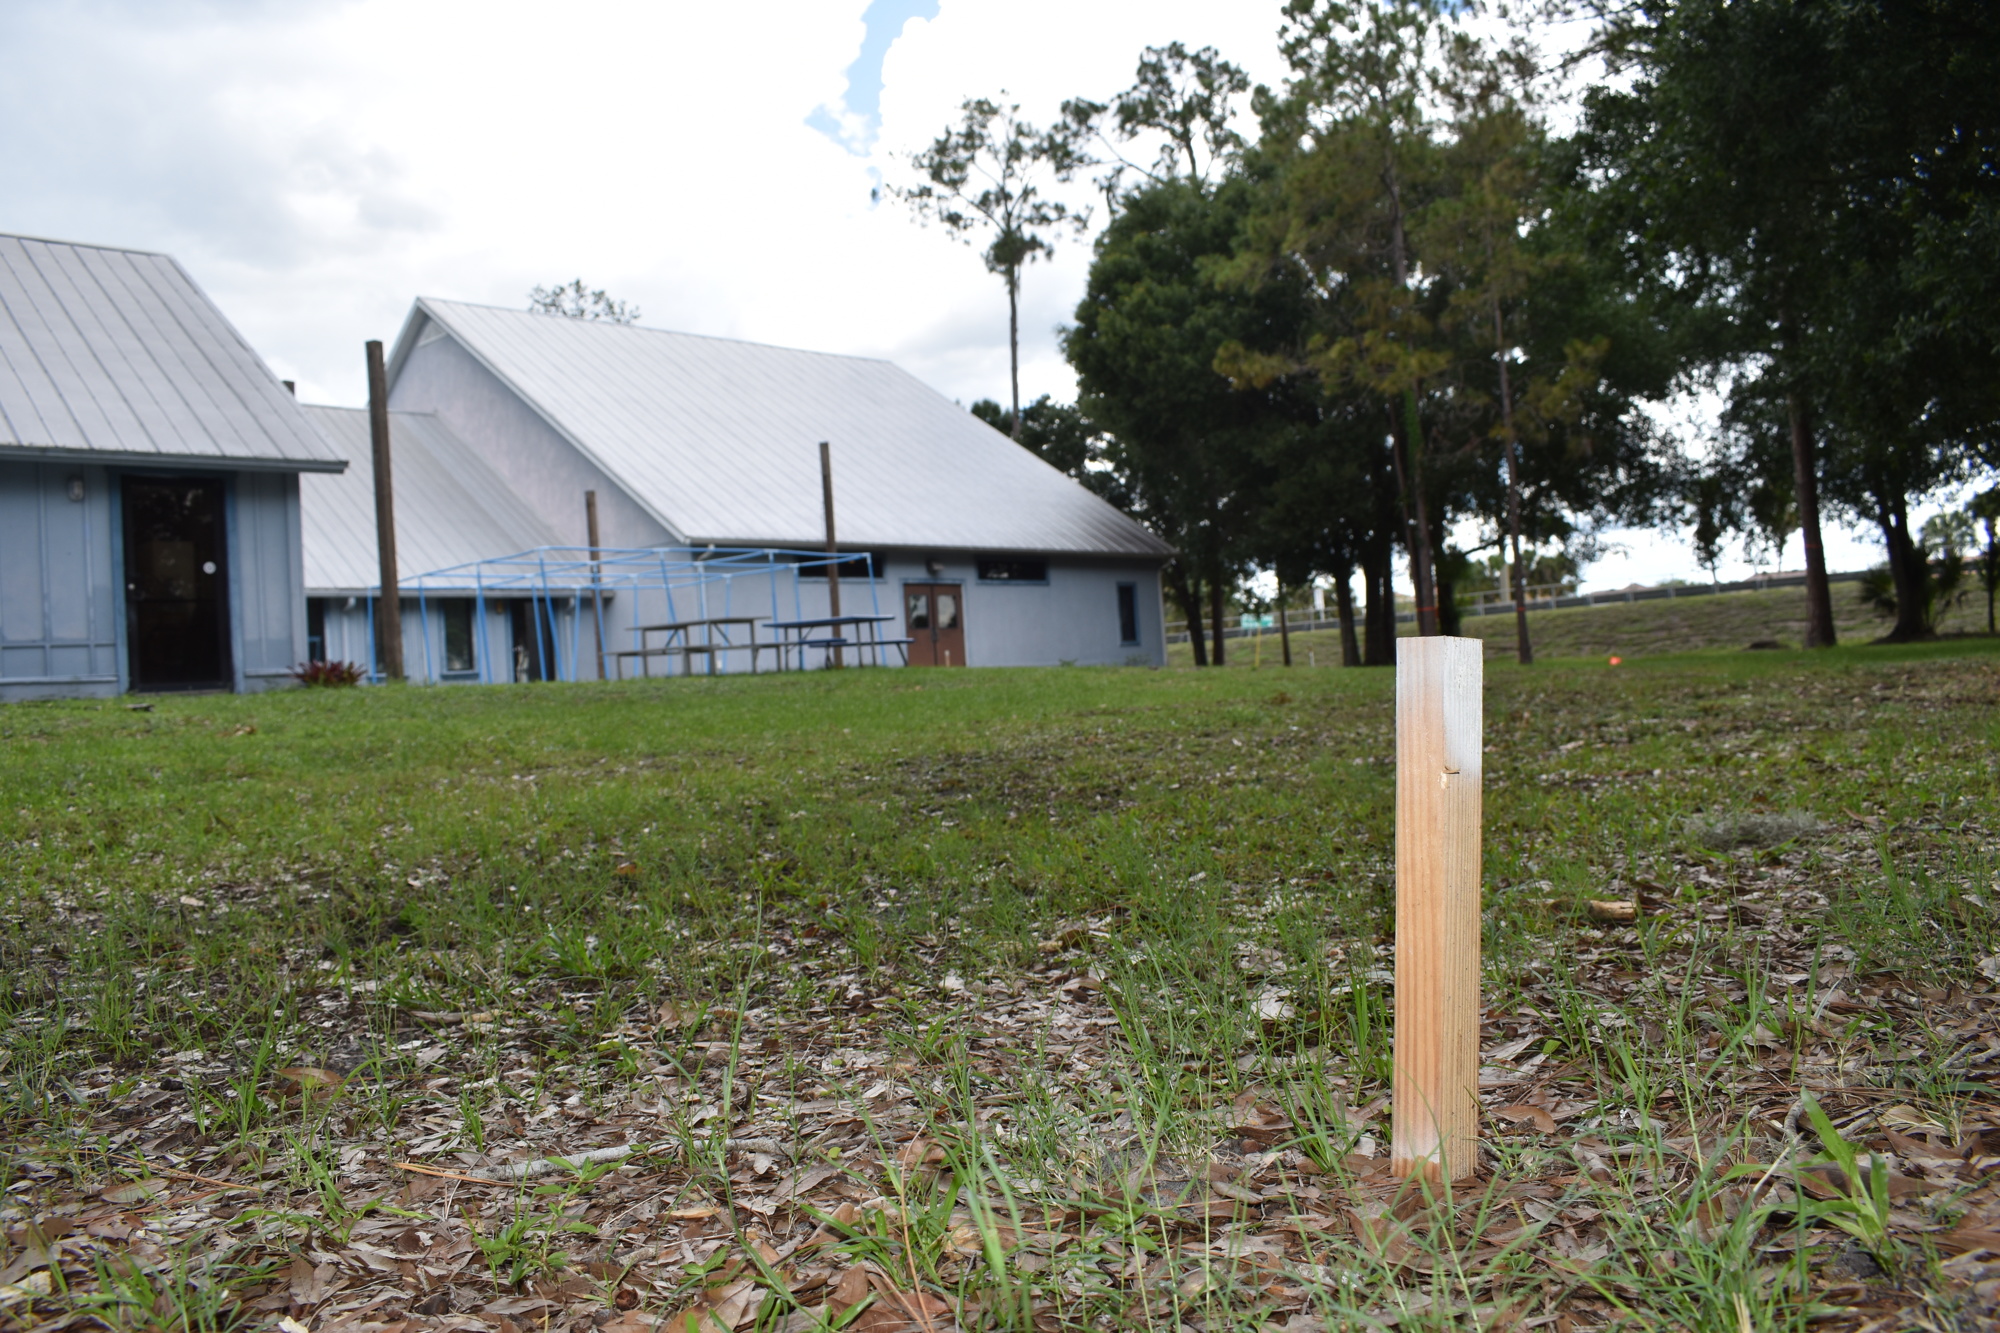 A wooden stake stands in the ground, marking a corner of the space the new events center will occupy.